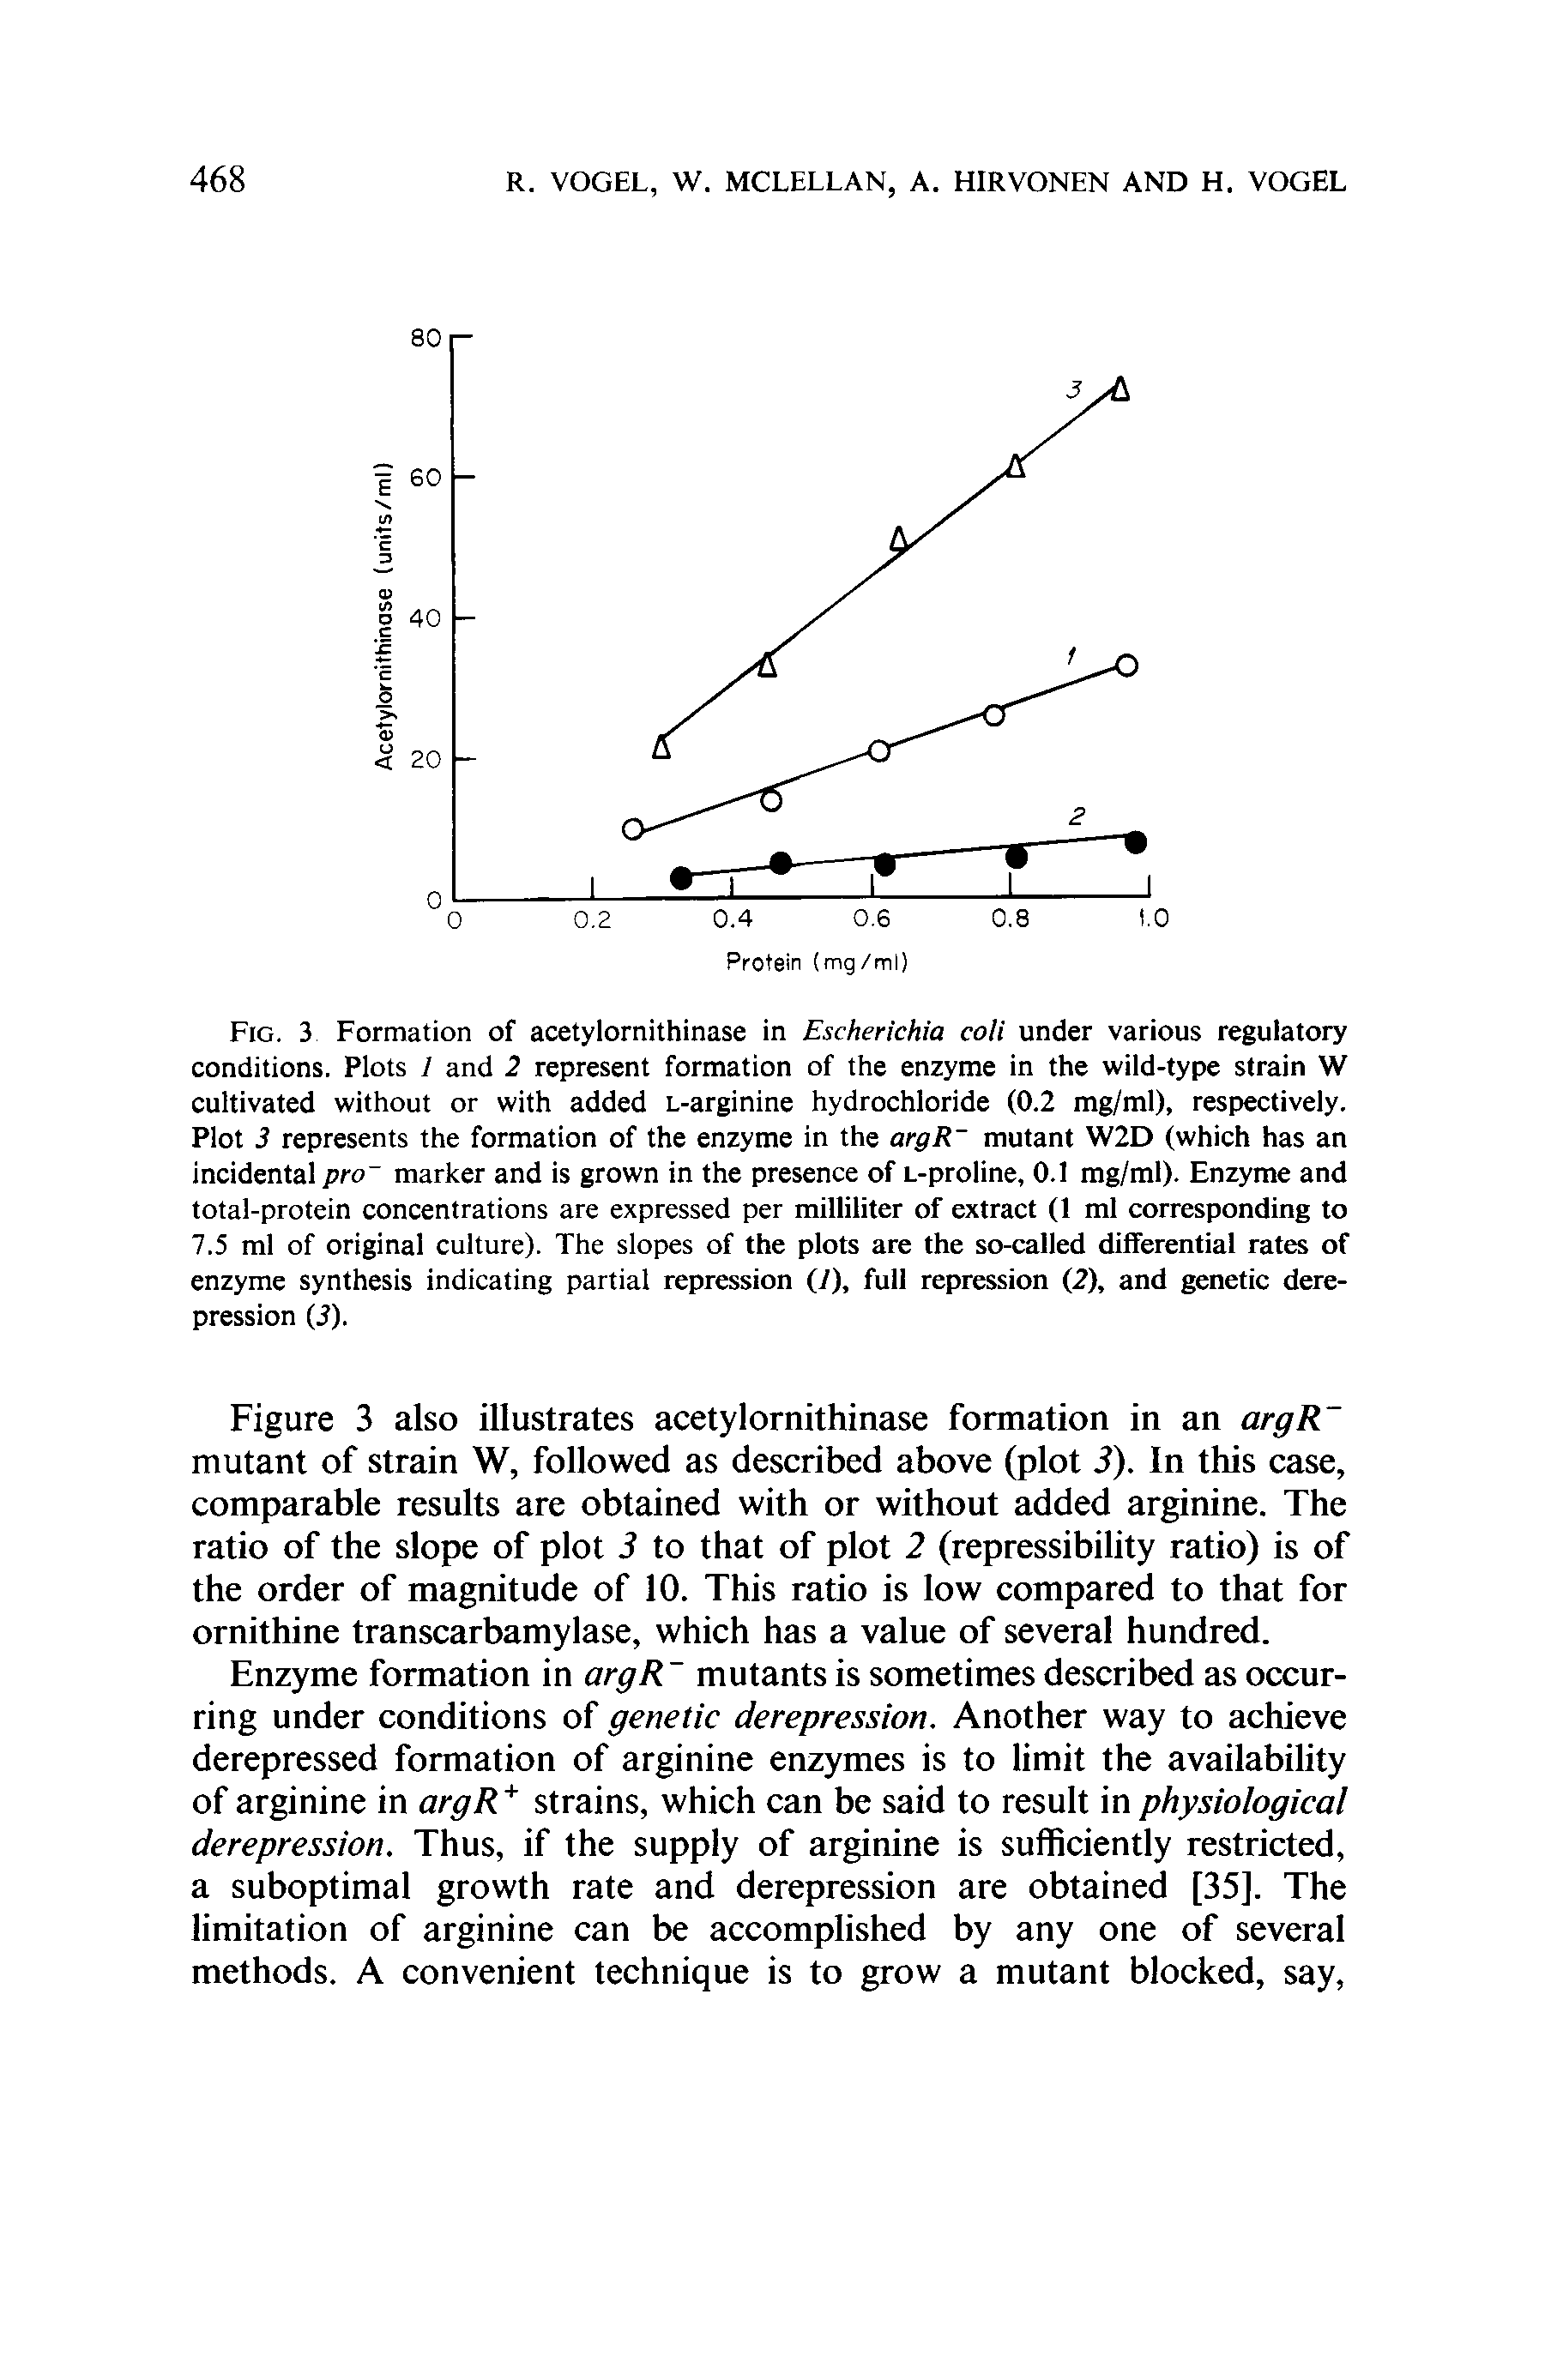 Fig. 3 Formation of acetylornithinase in Escherichia coli under various regulatory conditions. Plots I and 2 represent formation of the enzyme in the wild-type strain W cultivated without or with added L-arginine hydrochloride (0.2 mg/ml), respectively. Plot 3 represents the formation of the enzyme in the argR mutant W2D (which has an incidental pro marker and is grown in the presence of L-proline, 0.1 mg/ml). Enzyme and total-protein concentrations are expressed per milliliter of extract (1 ml corresponding to 7.5 ml of original culture). The slopes of the plots are the so-called diflFerential rates of enzyme synthesis indicating partial repression (7), full repression (2), and genetic derepression (i).